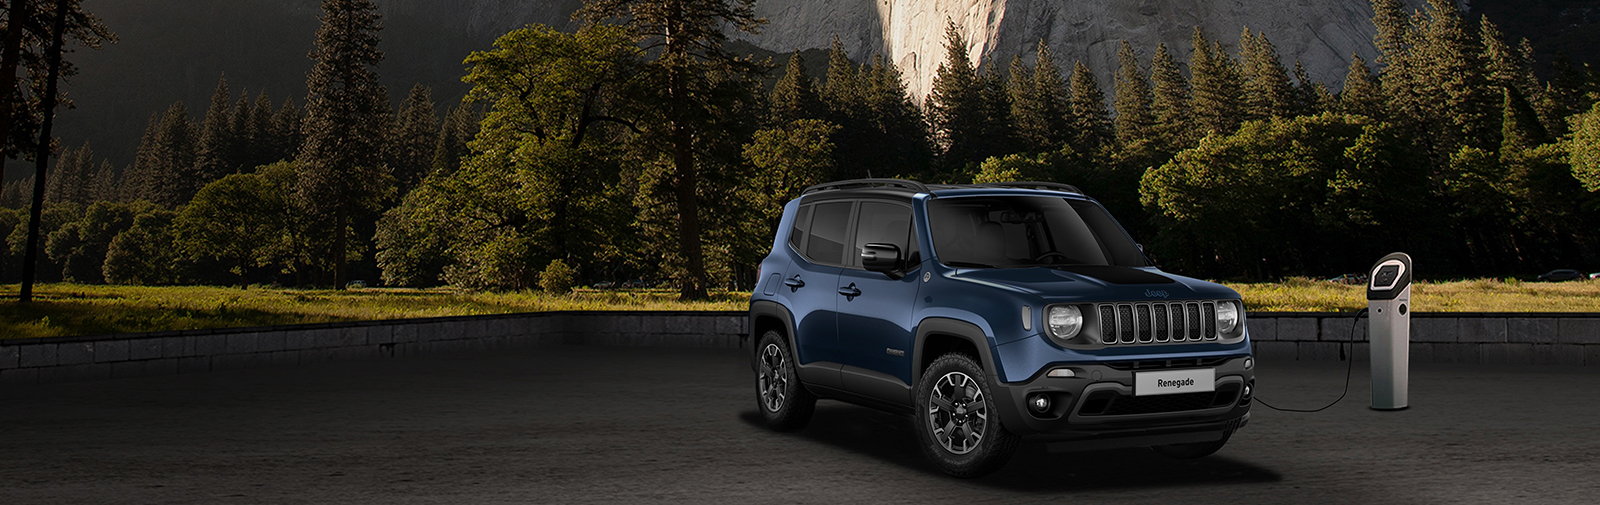 JEEP RENEGADE Hybride rechargeable